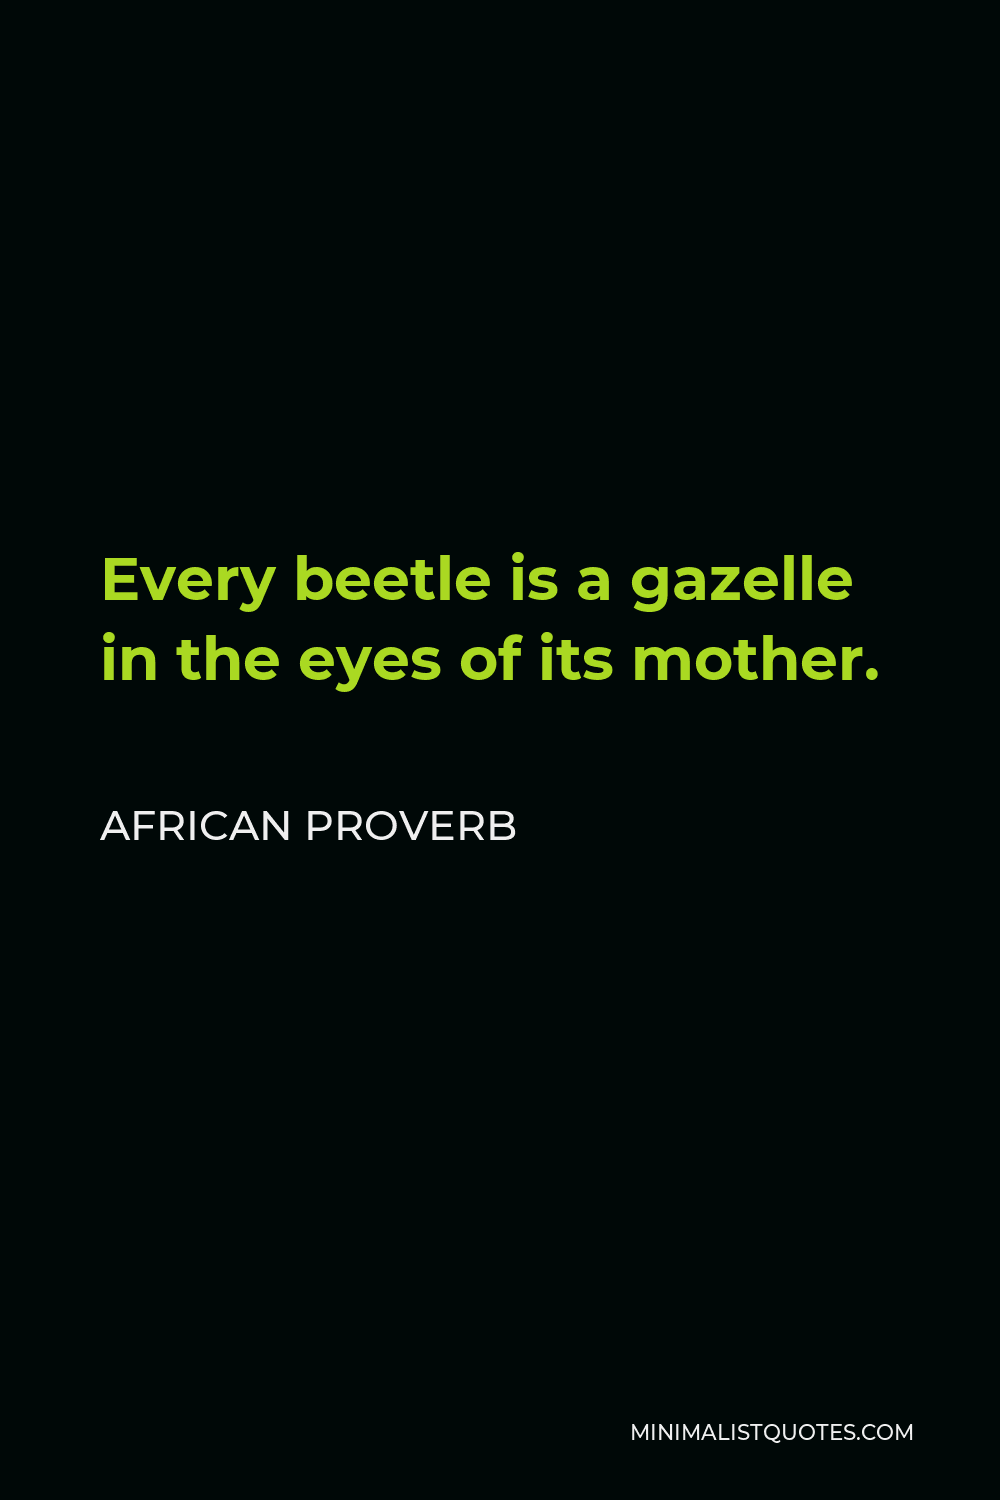 African Proverb Quote - Every beetle is a gazelle in the eyes of its mother.